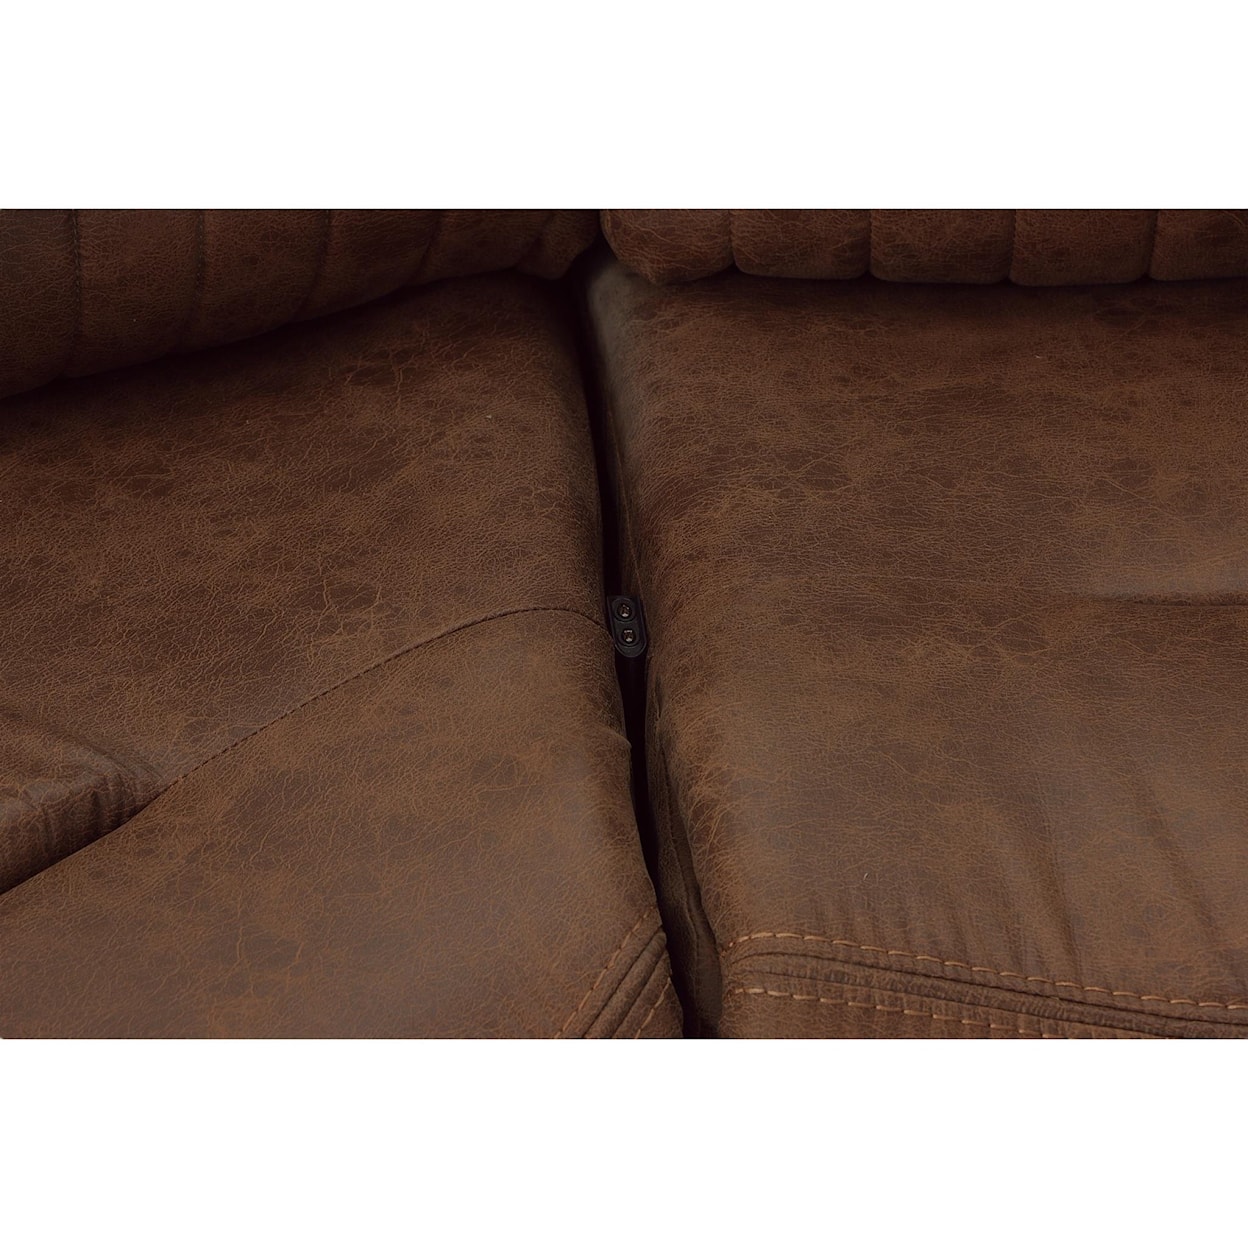 Lifestyle Franklin 3 Pc PWR Reclining Sectional